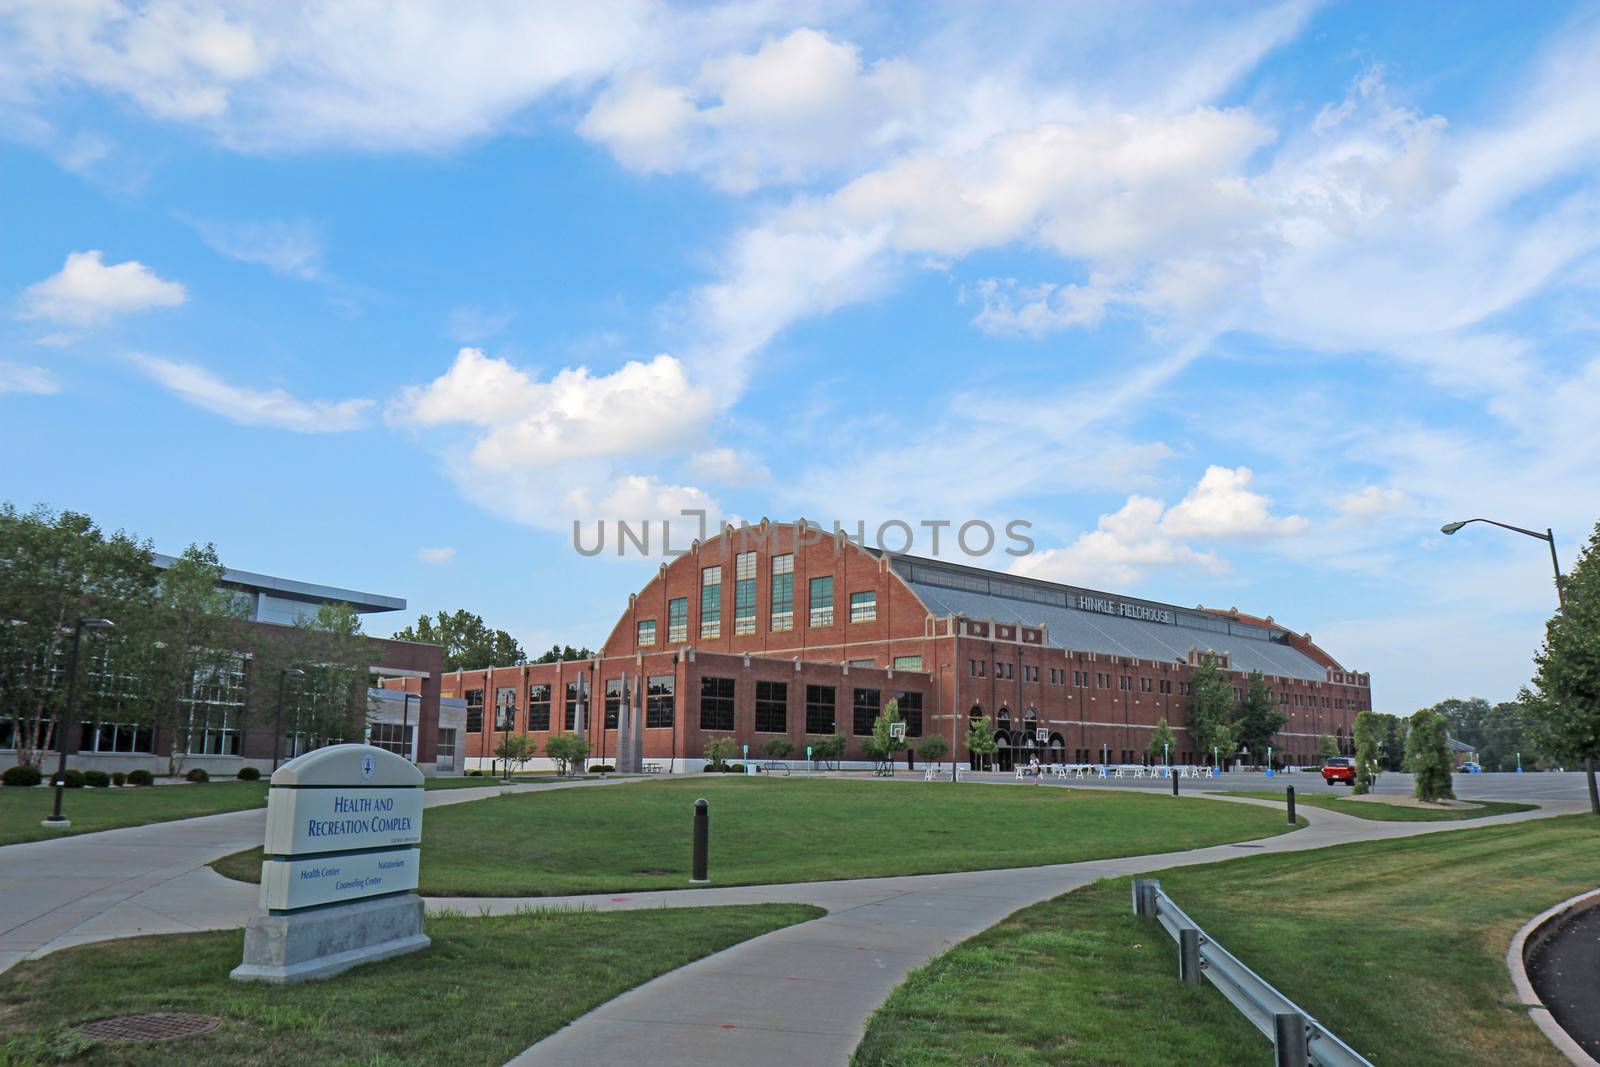 INDIANAPOLIS, INDIANA - JULY 30: Hinkle Fieldhouse basketball arena at Butler University, July 30, 2011. The Butler Bulldogs basketball team went to two consecutive NCAA final fours during 2010-2011.